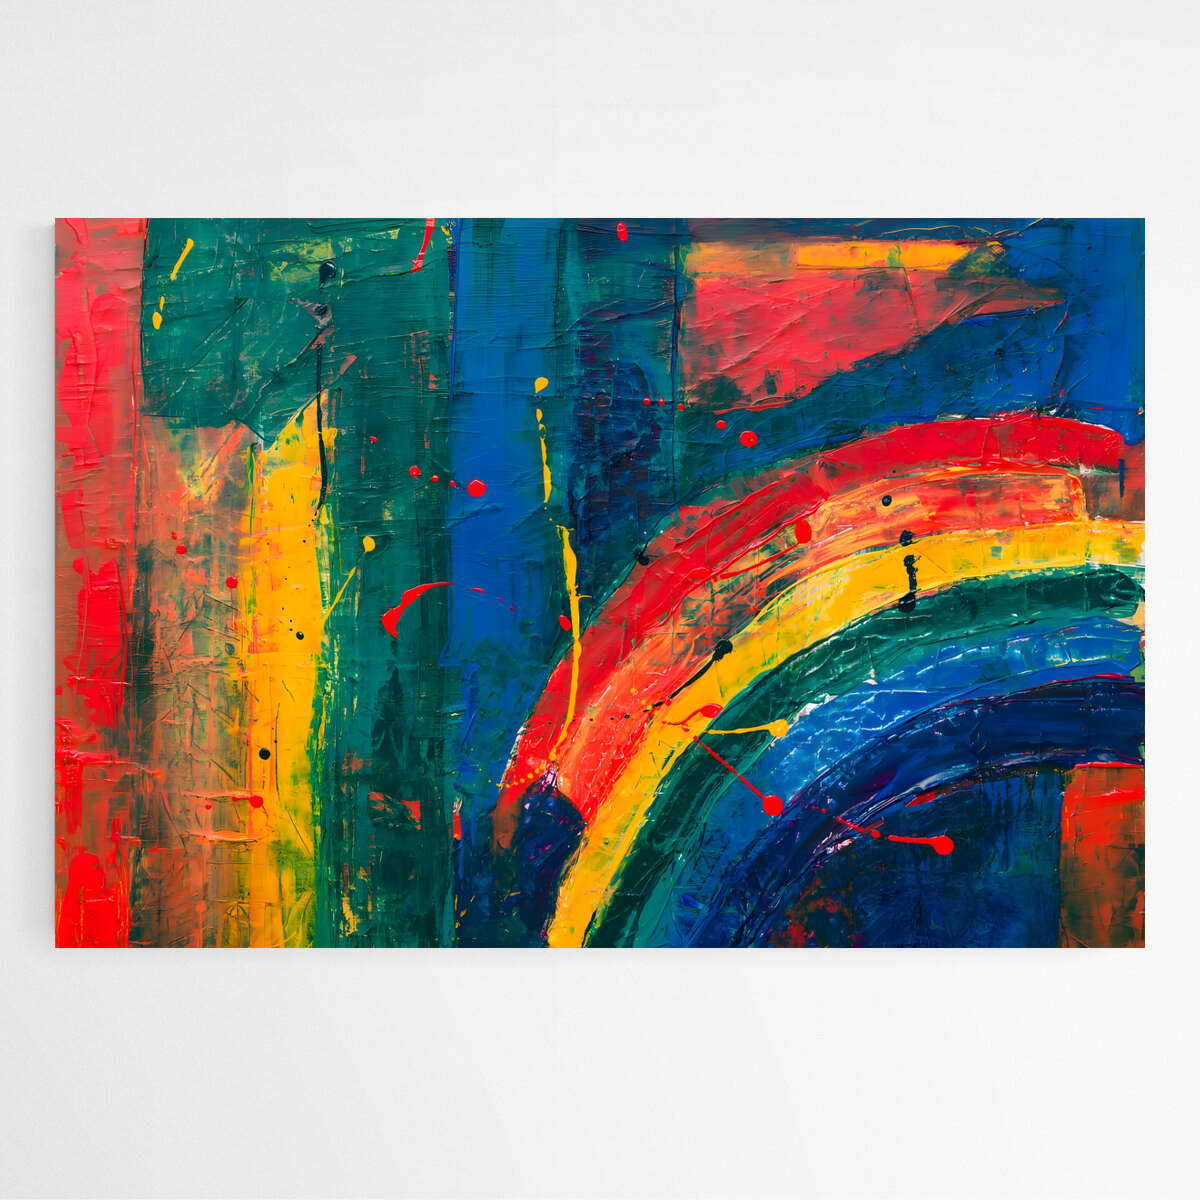 Spectrum Symphony | Abstract Wall Art Prints - The Canvas Hive